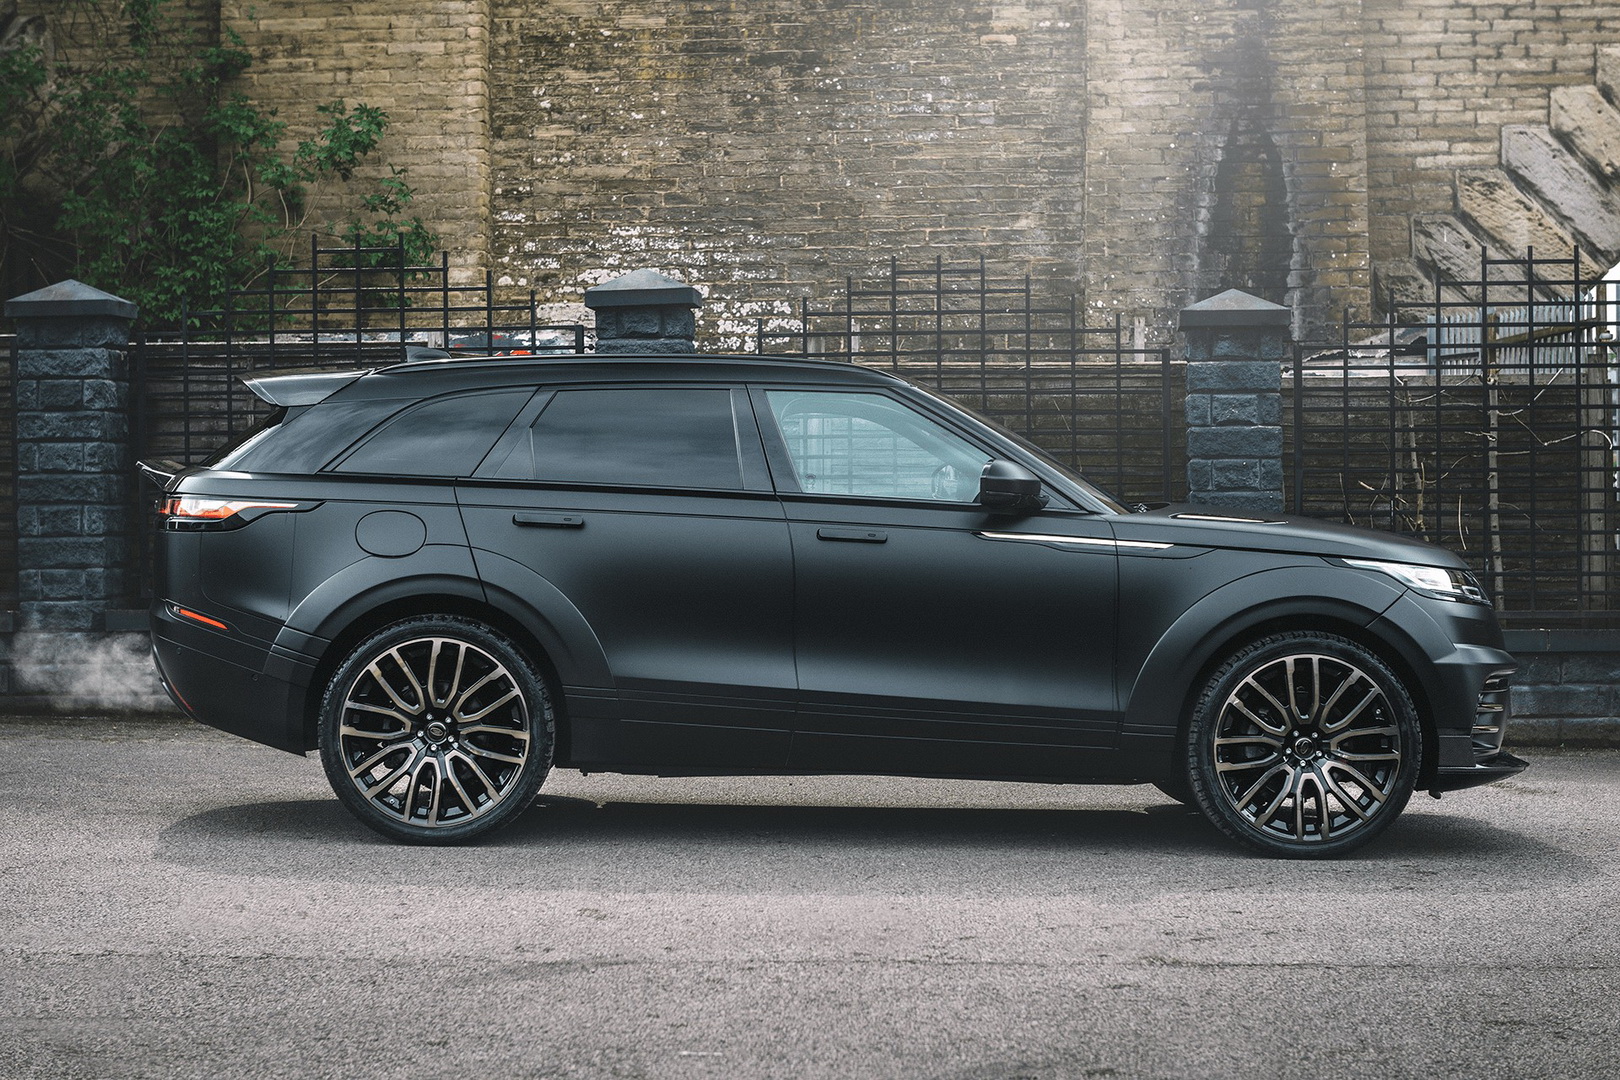 BlackedOut Range Rover Velar Wants Way More Than A Drink To Go Home